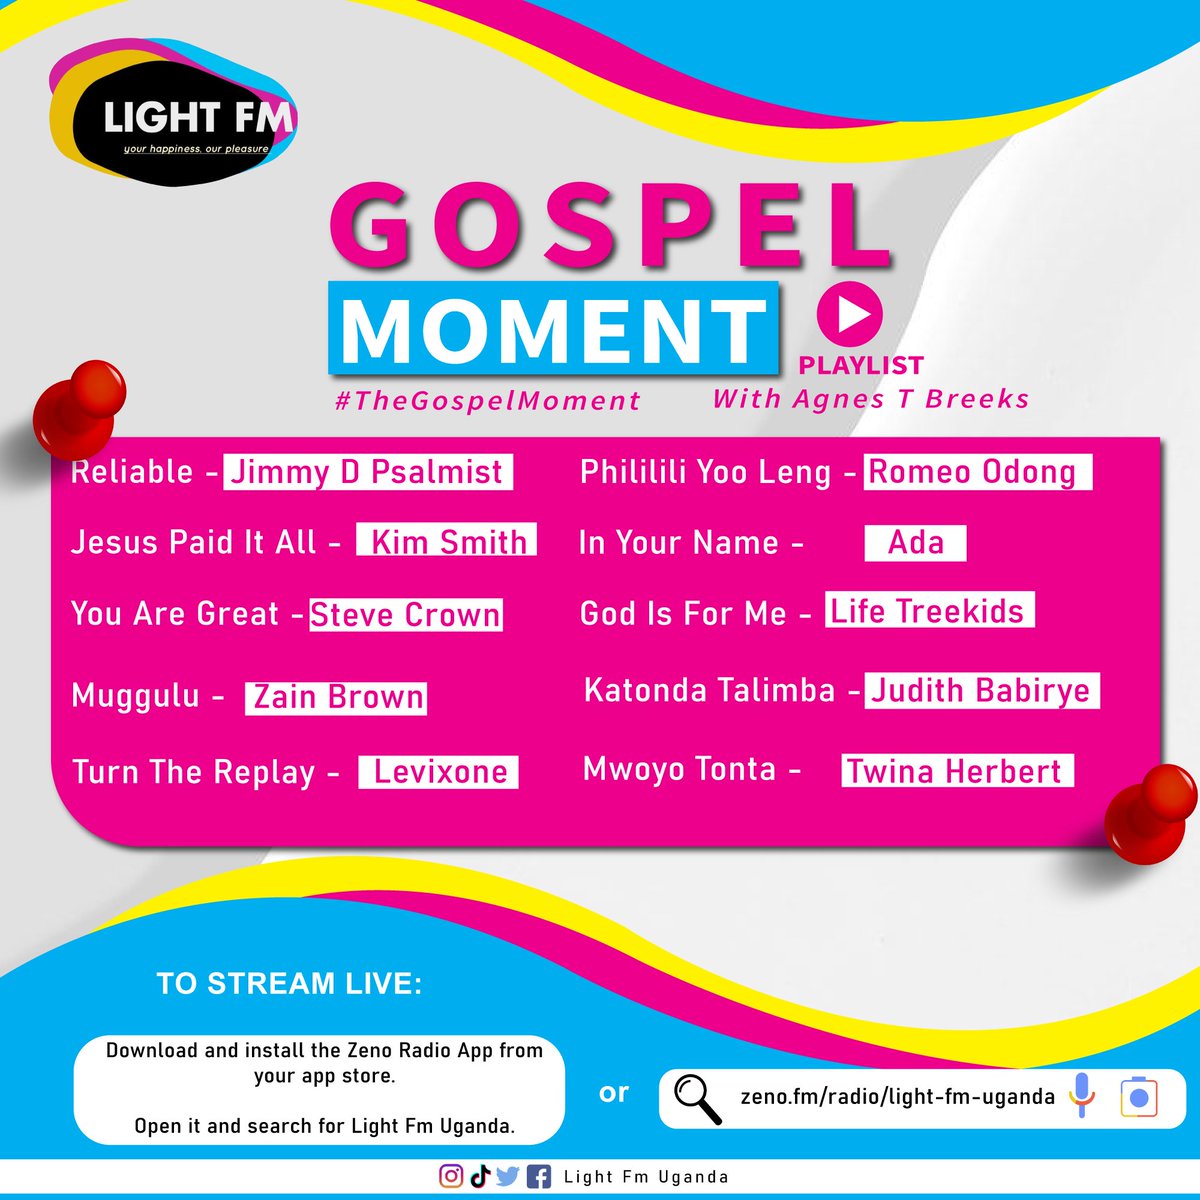 Our Sunday Gospel Moment playlist |  With Agnes T Breeks

#TheGospelMoment

▶Reliable - @JimmyDPsalmist
▶ Jesus Paid It All - KimSmith
▶ You Are Great - @SteveCrownmusic
▶ Muggulu - Zani Brown
▶ Turn The Replay - @levixone
▶ Phililili Yo Leng - Romeo Odong